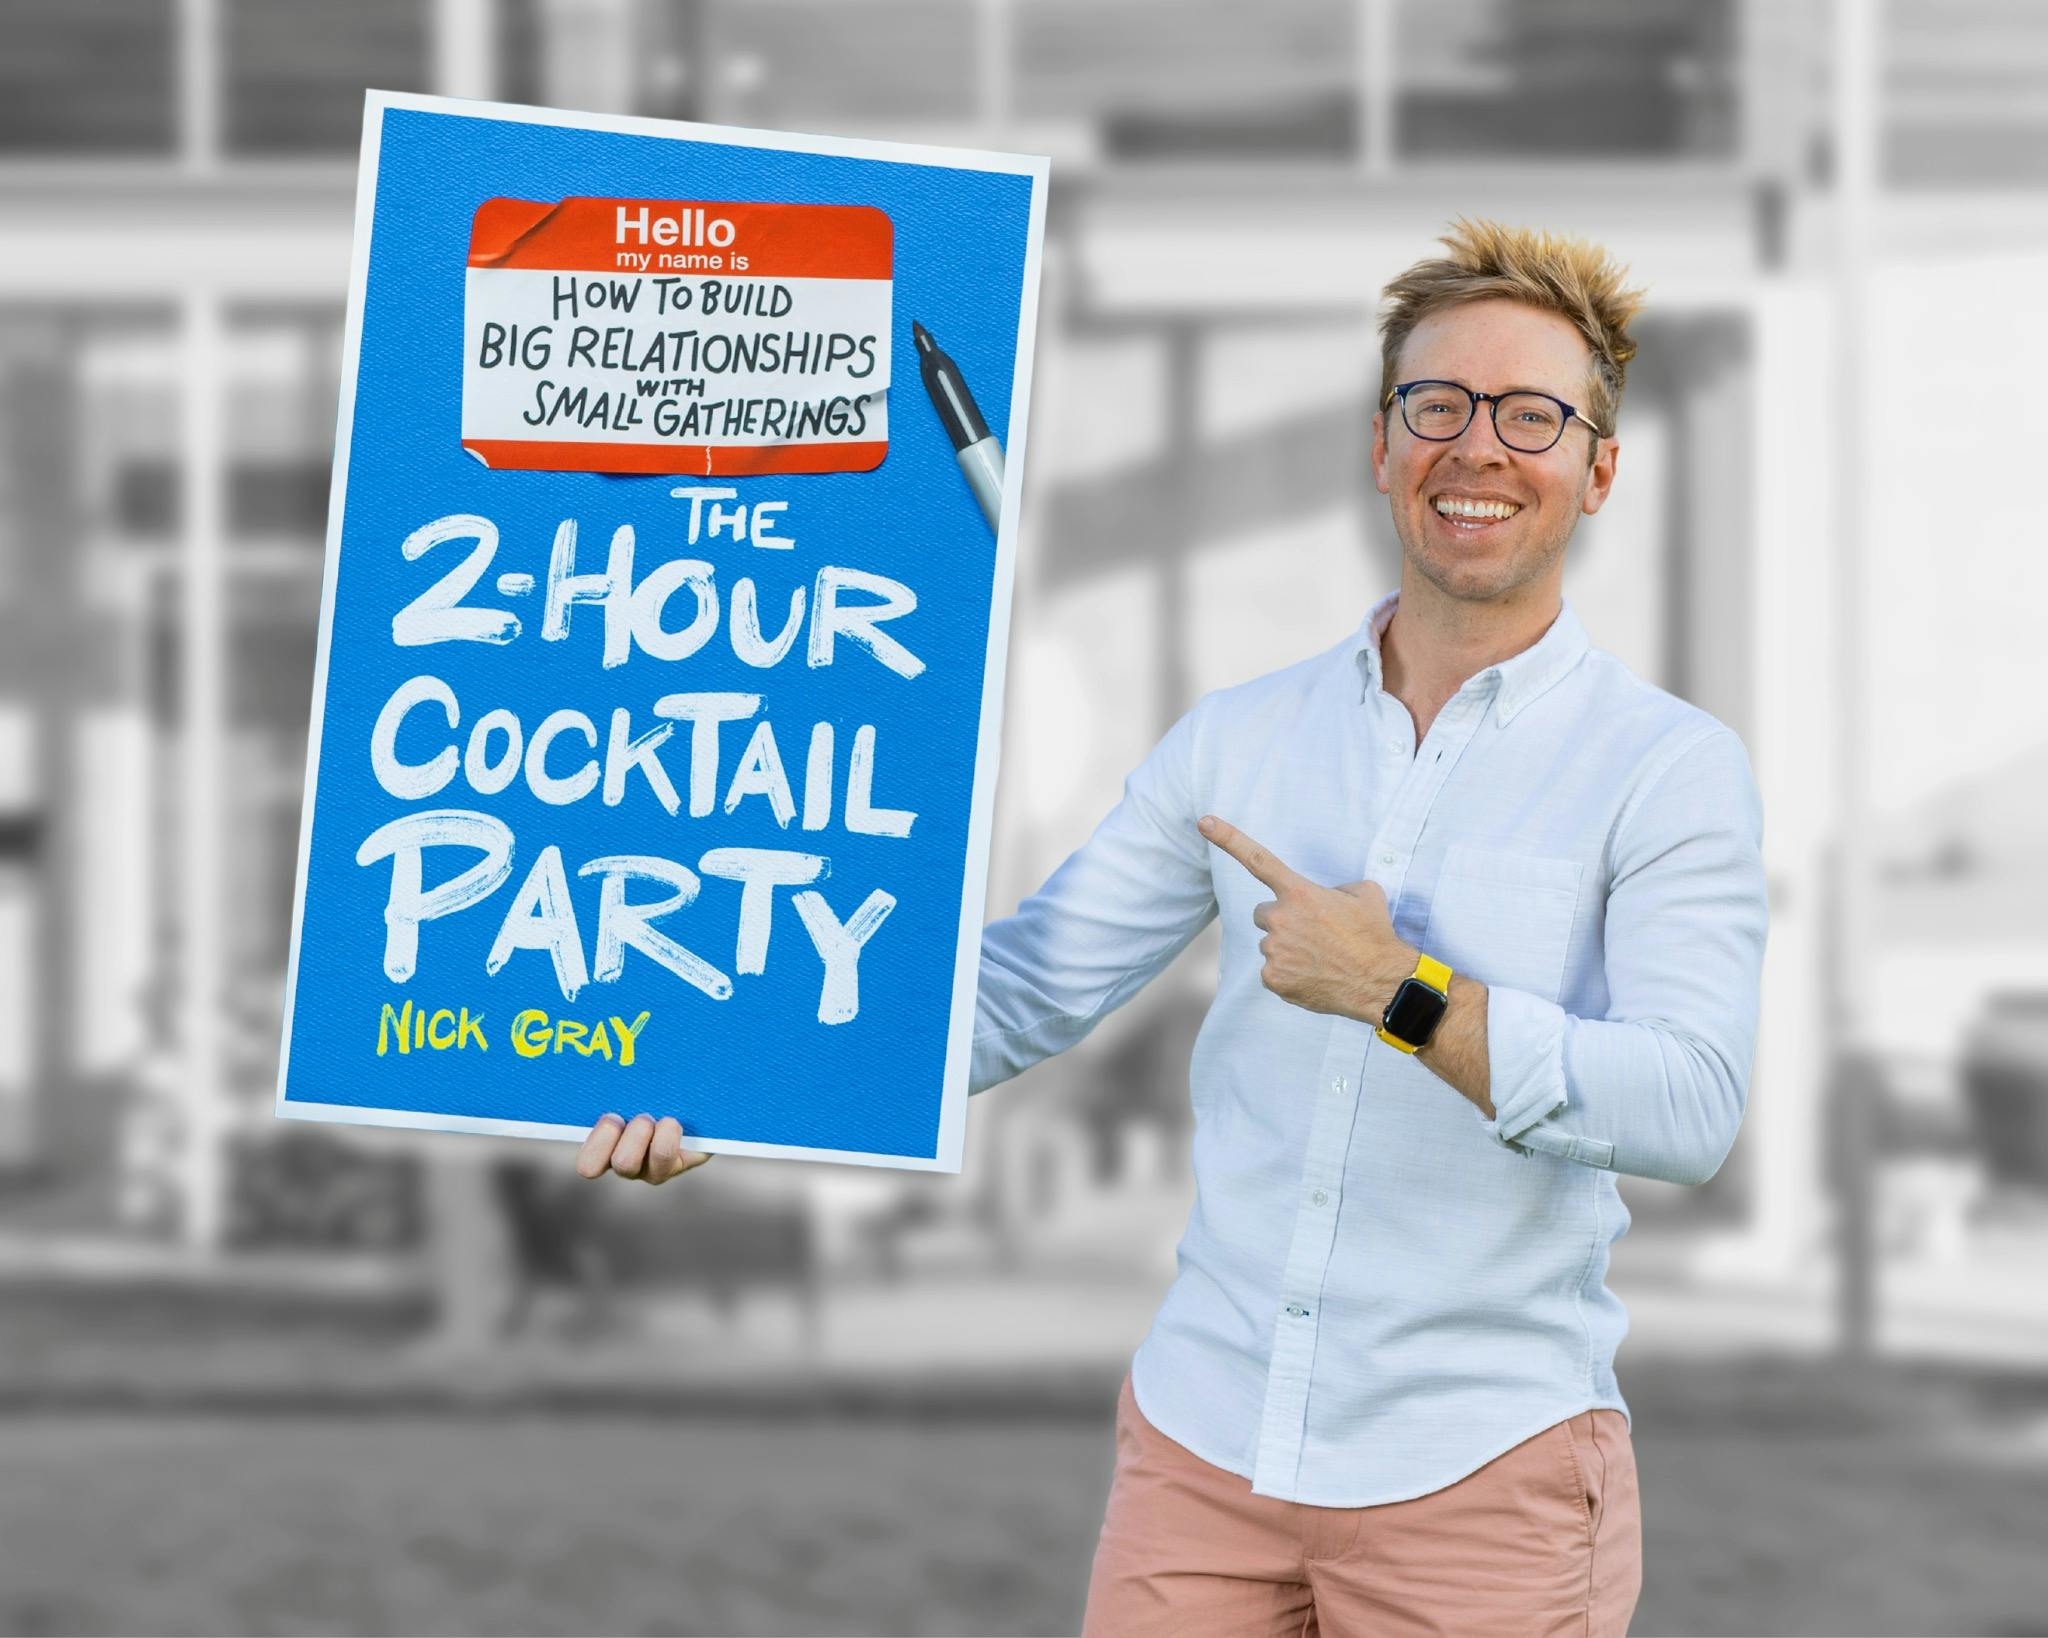 Nick holding a poster of The 2-Hour Cocktail Party book cover